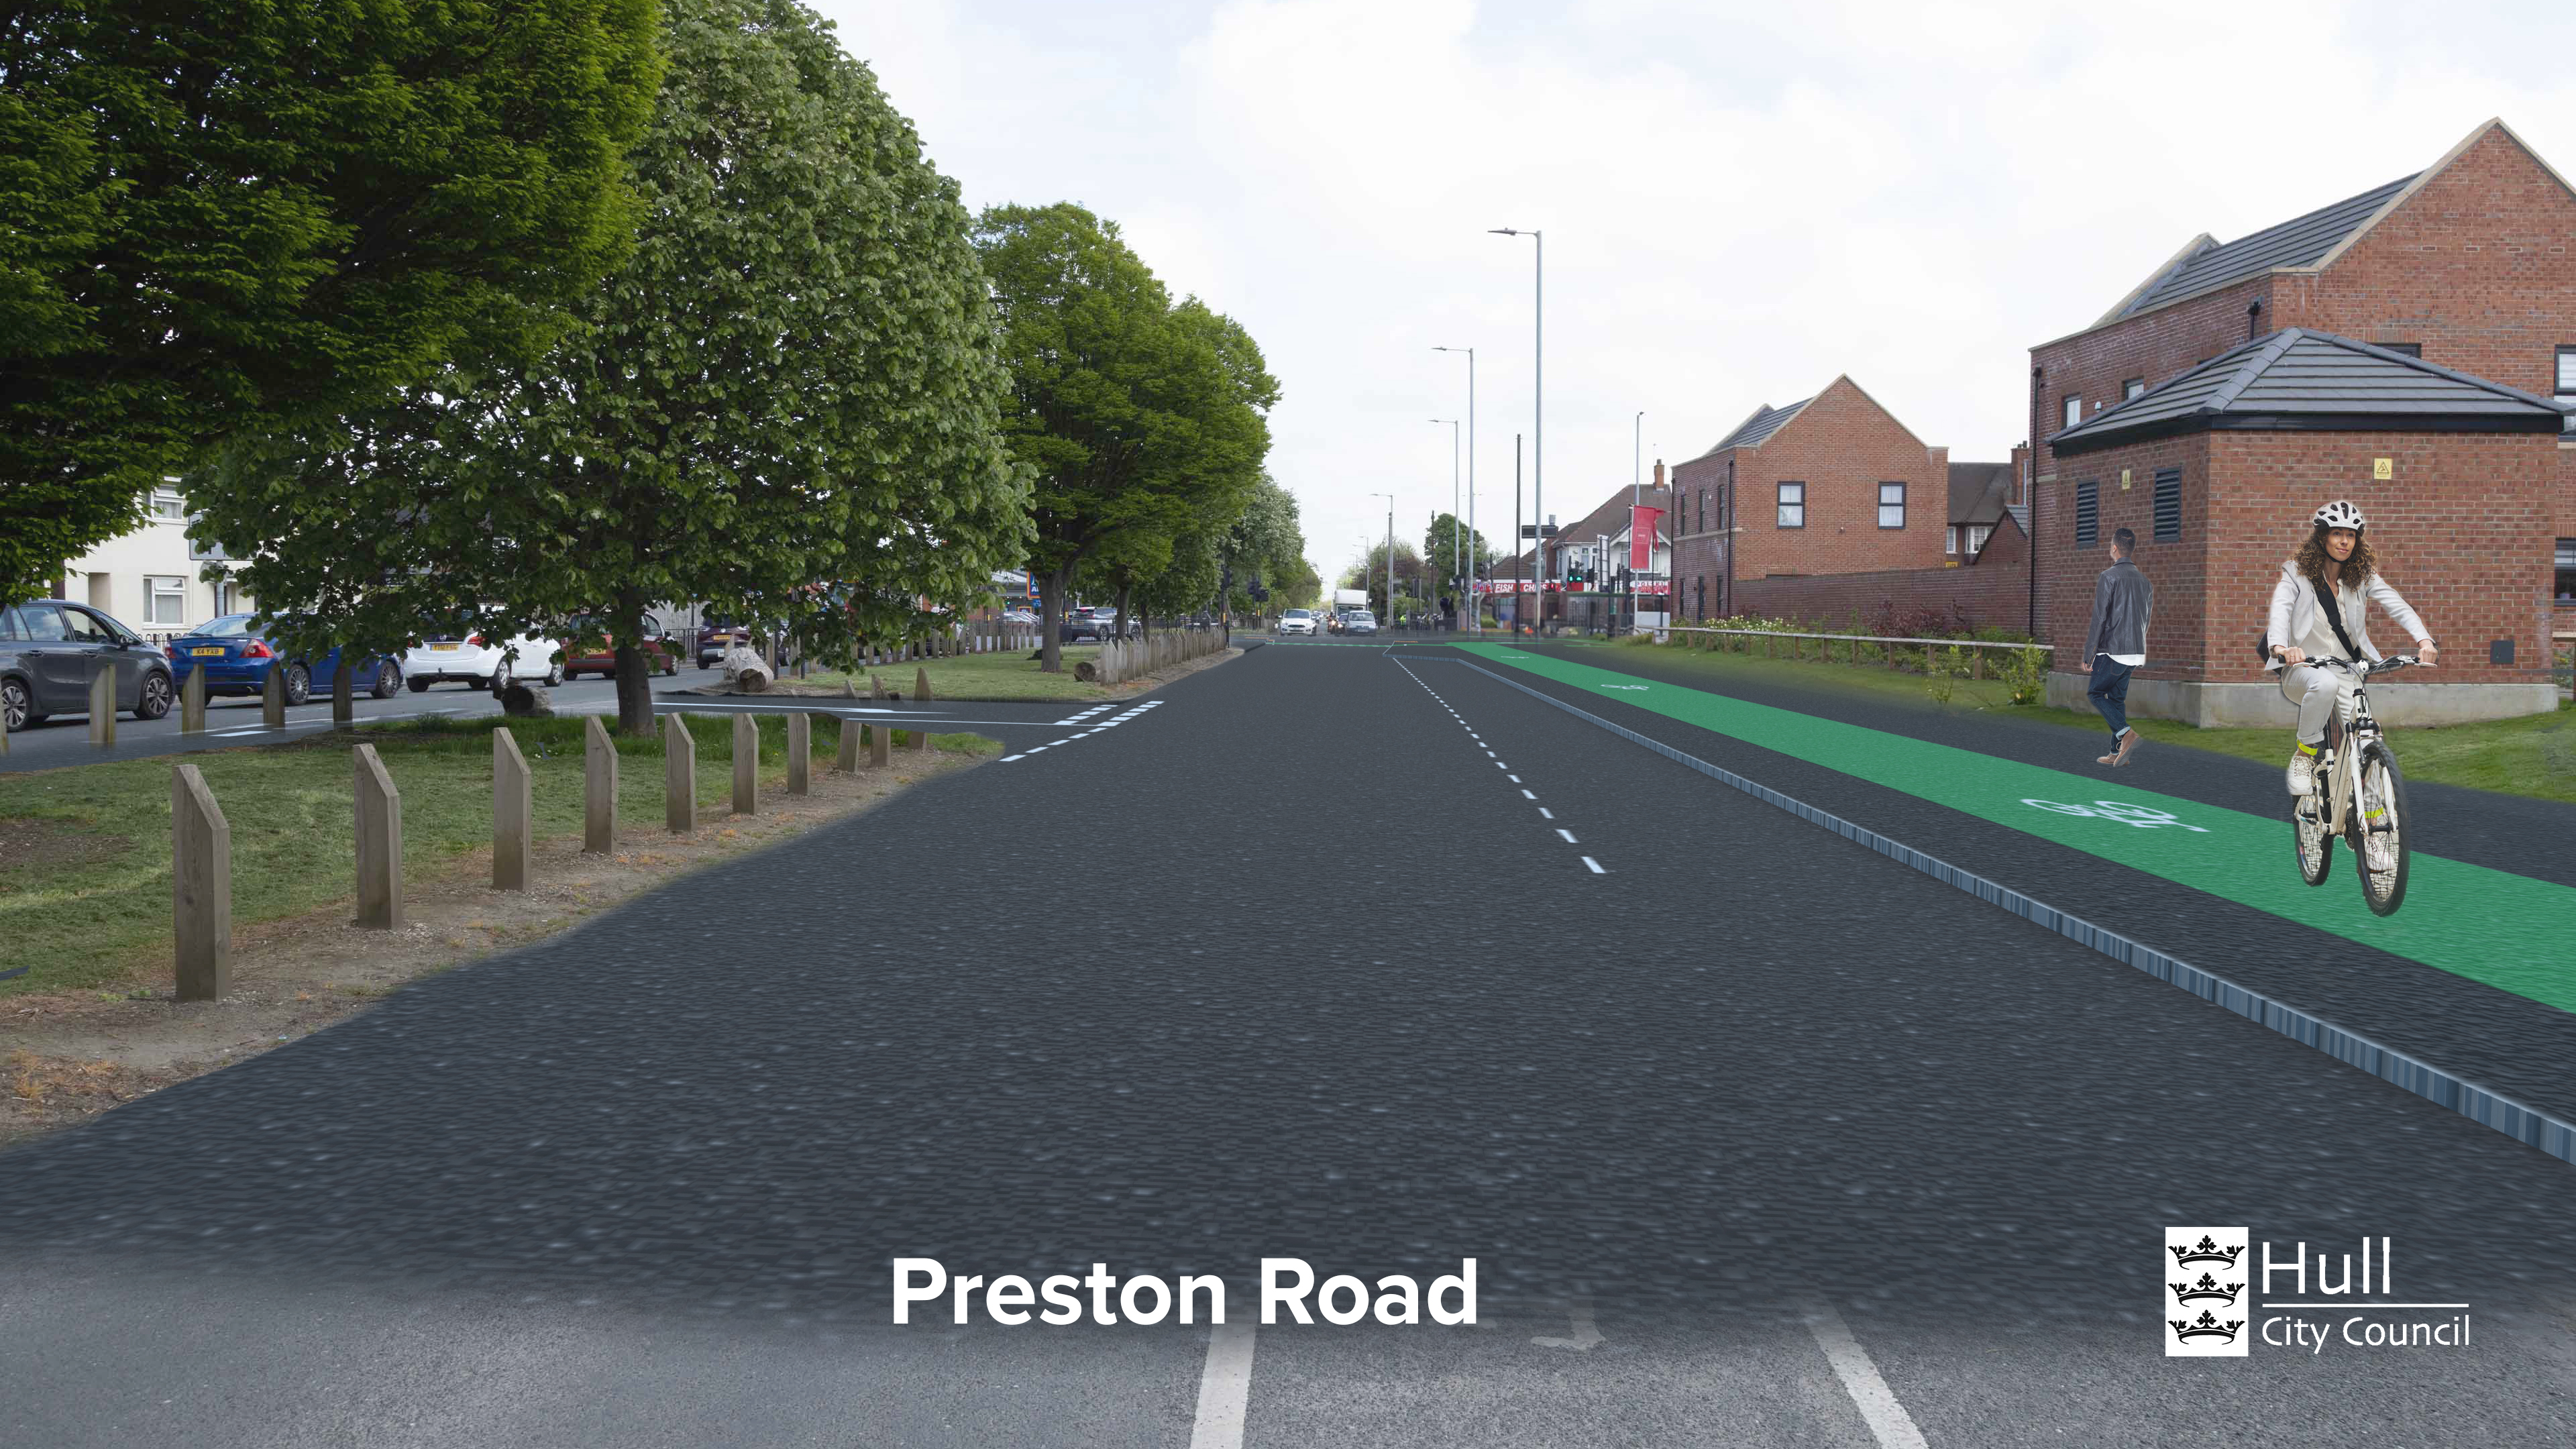 Cycle scheme proposed for Preston Road